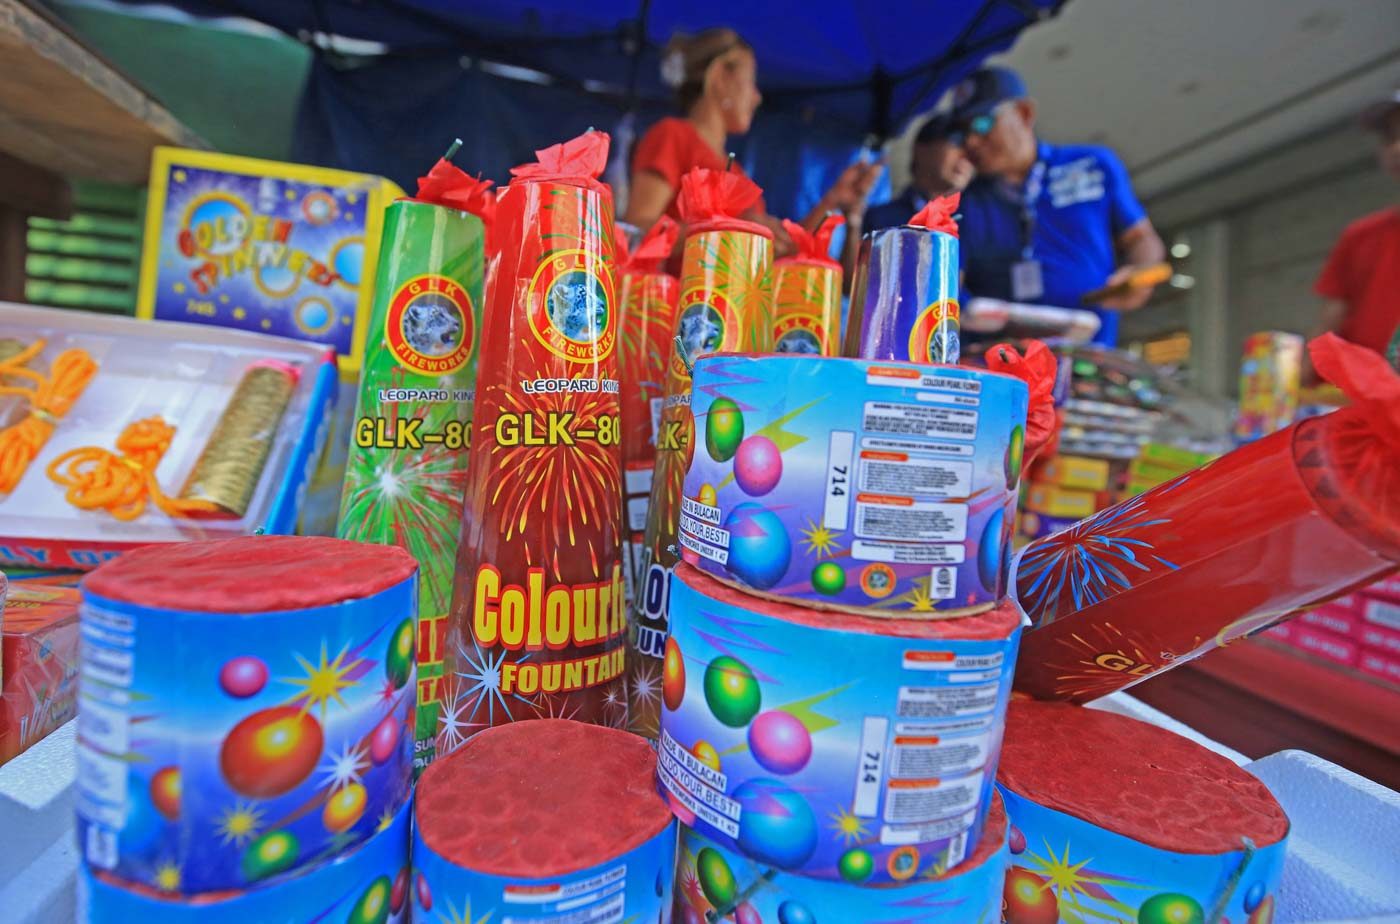 Sotto wants to regulate firecracker use